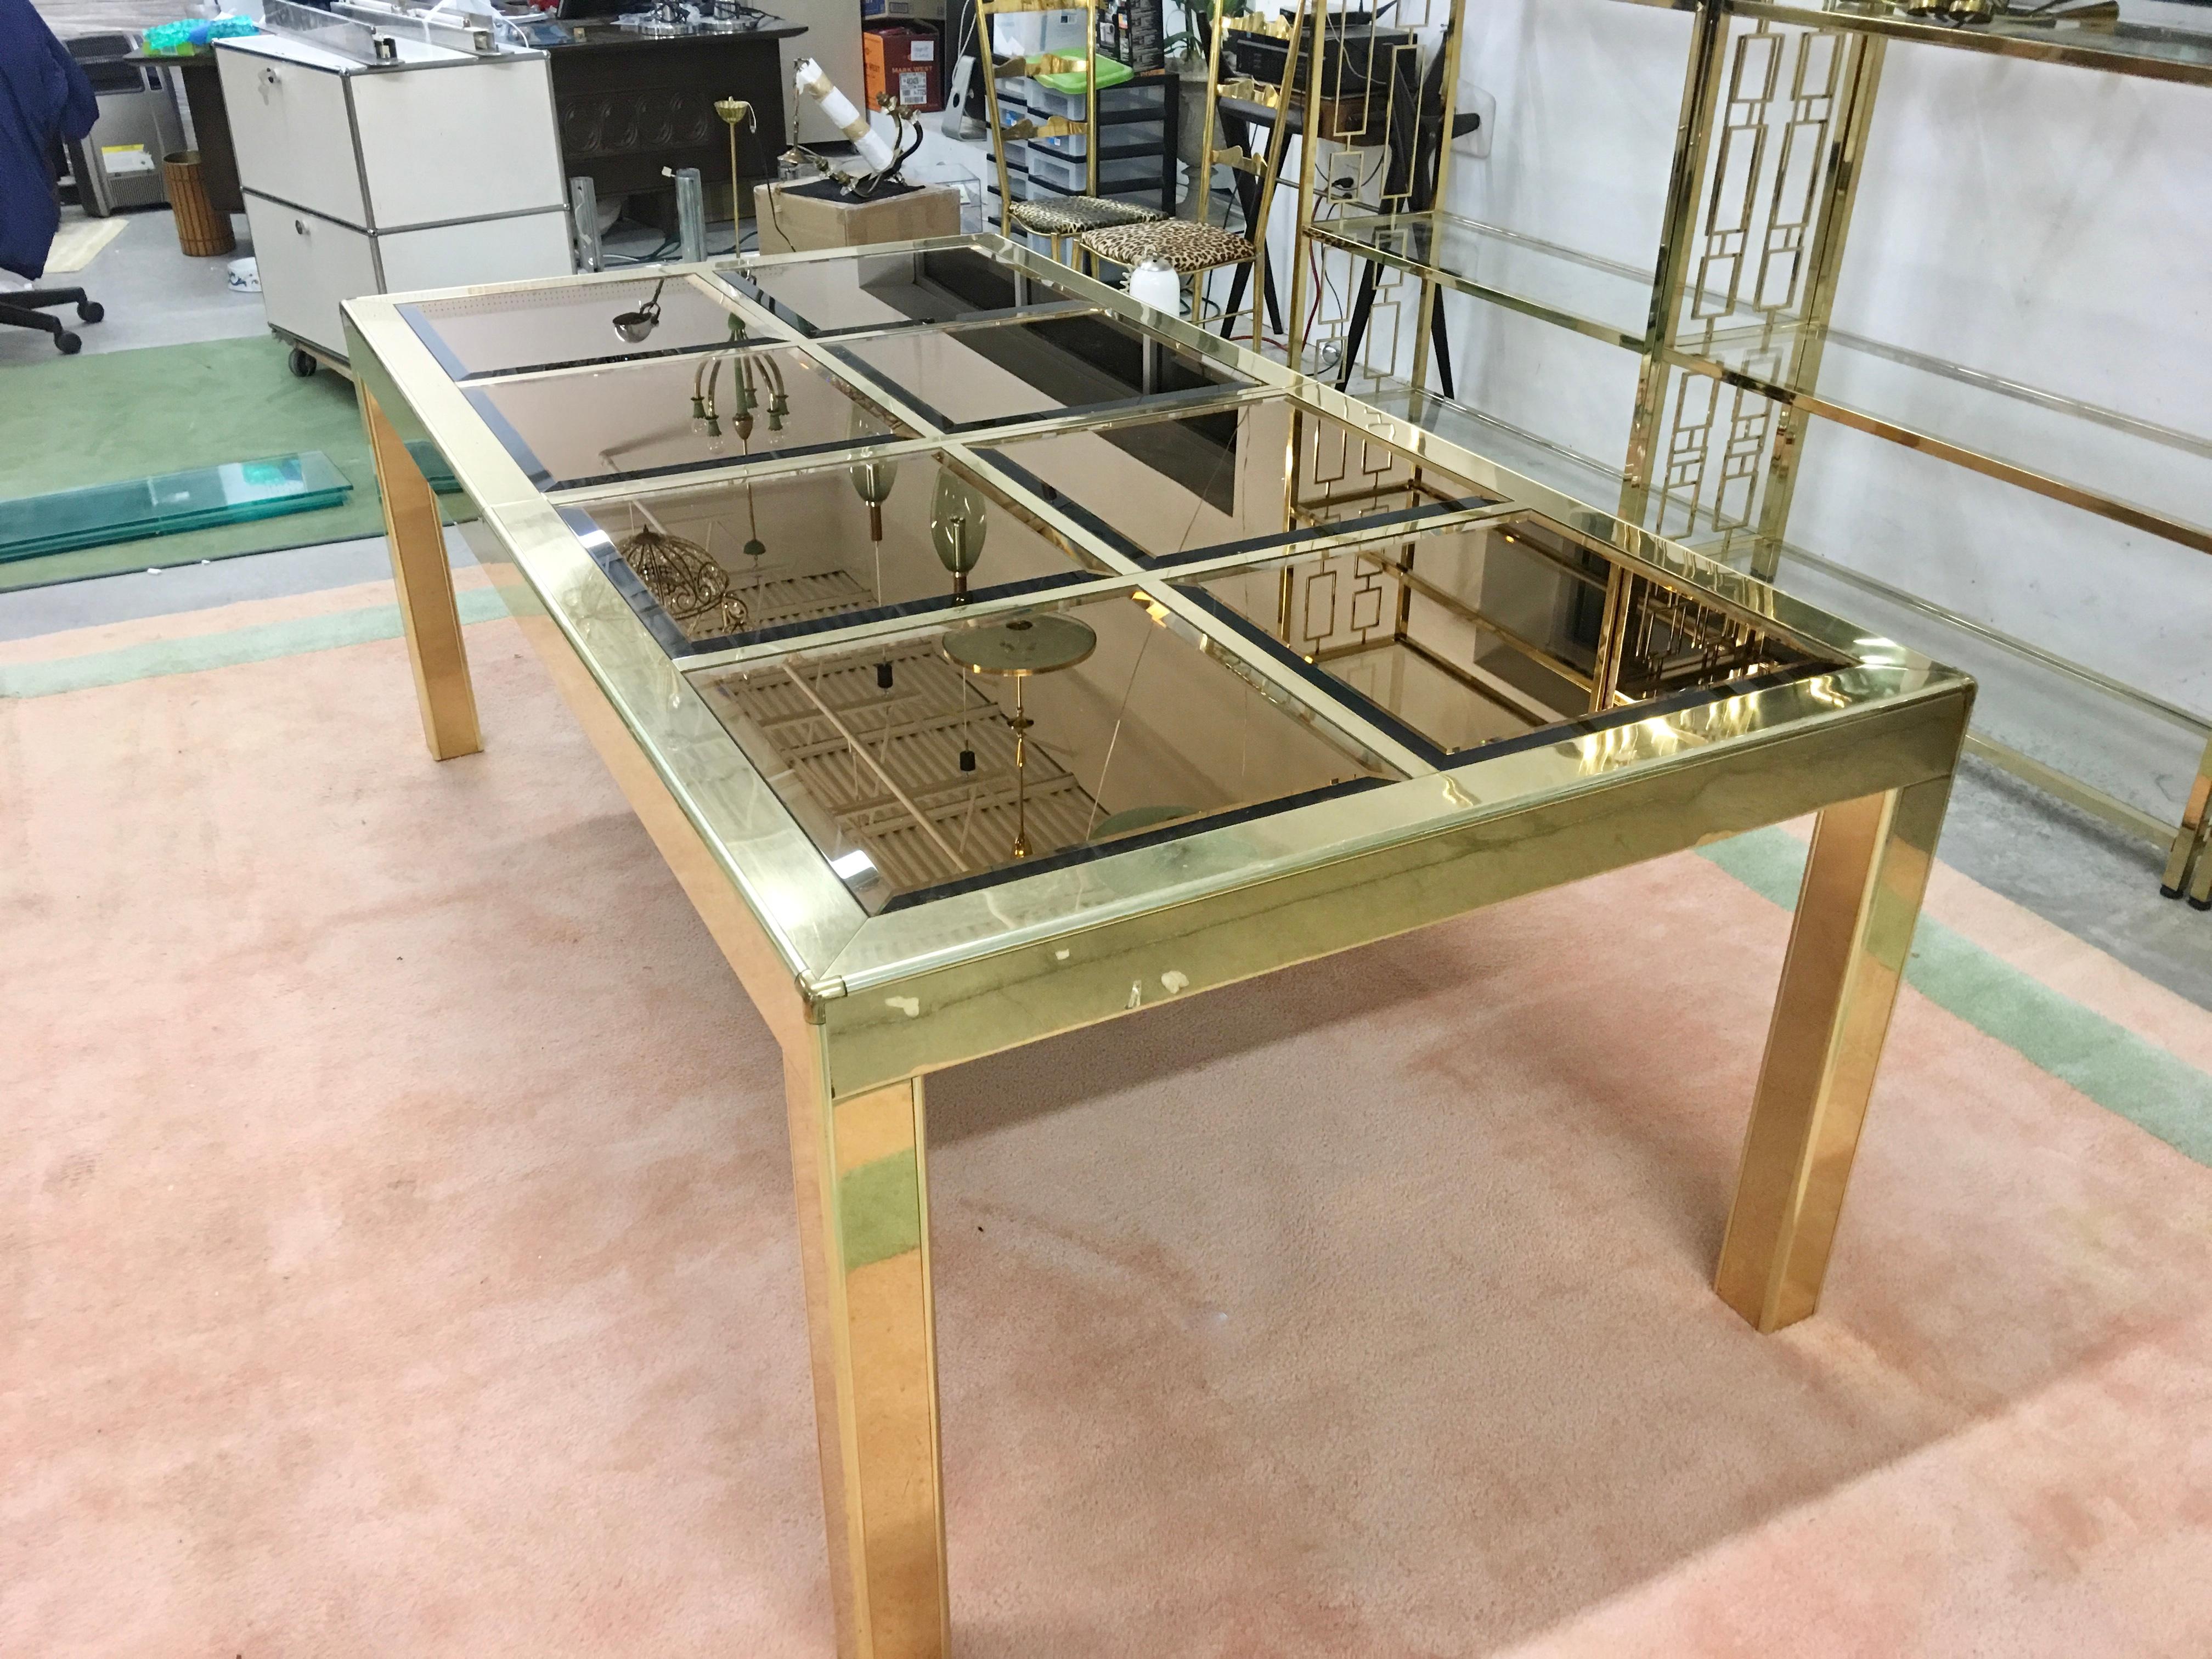 Brass framed parsons shape dining table by Mastercraft of Grand Rapids. The top of the table is an open grid into which inserts the 18 inch by 18 inch square shaped mirror panels which are beveled and are tinted a metallic bronze giving this table a